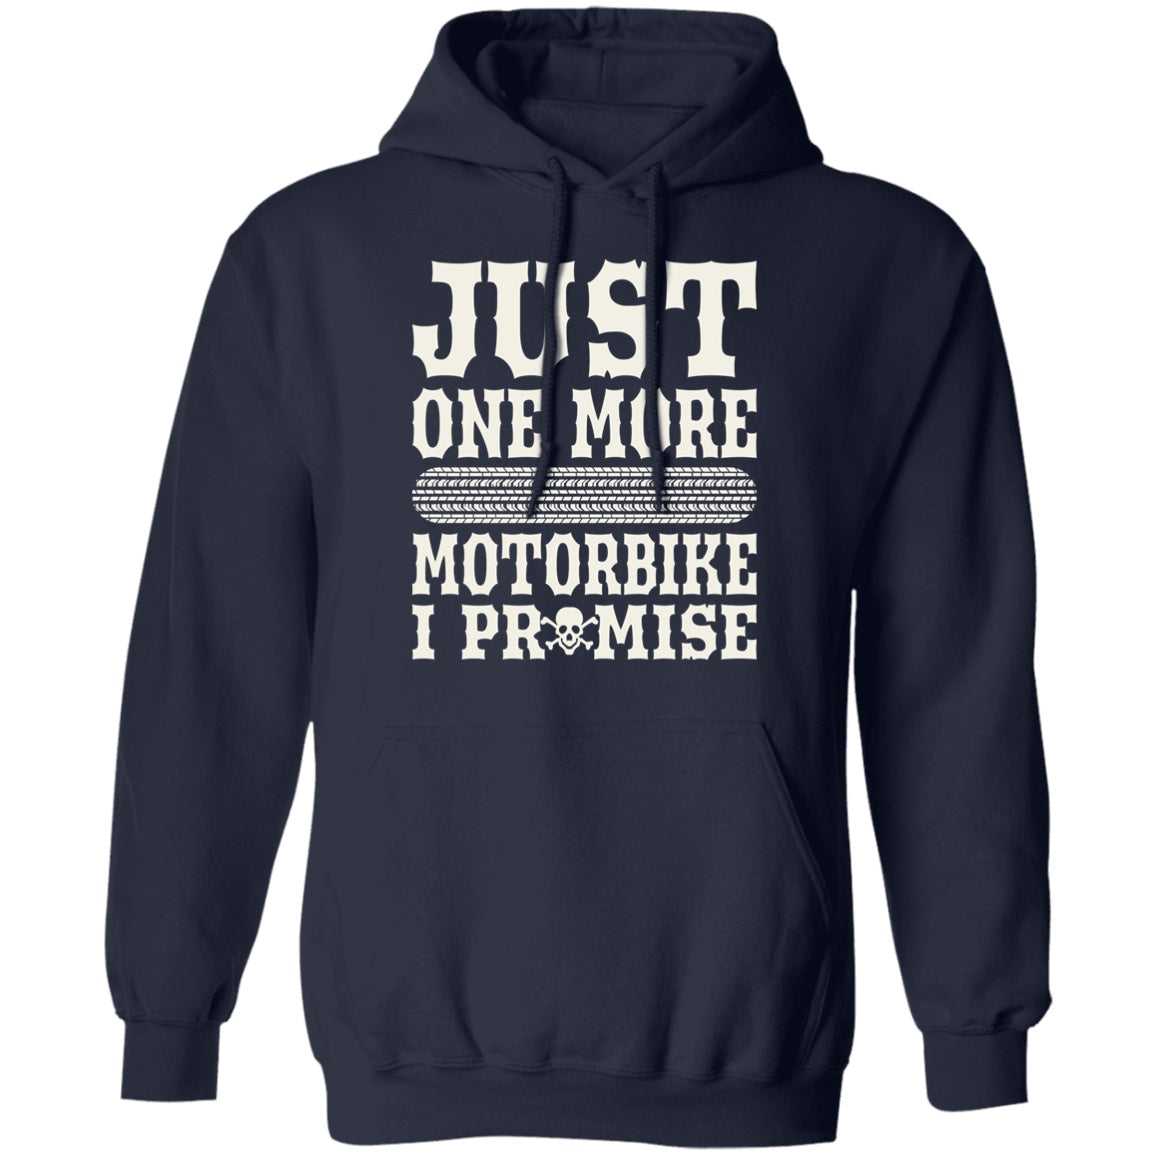 Apparel - Just One More Motorbike. I Promise Shirt